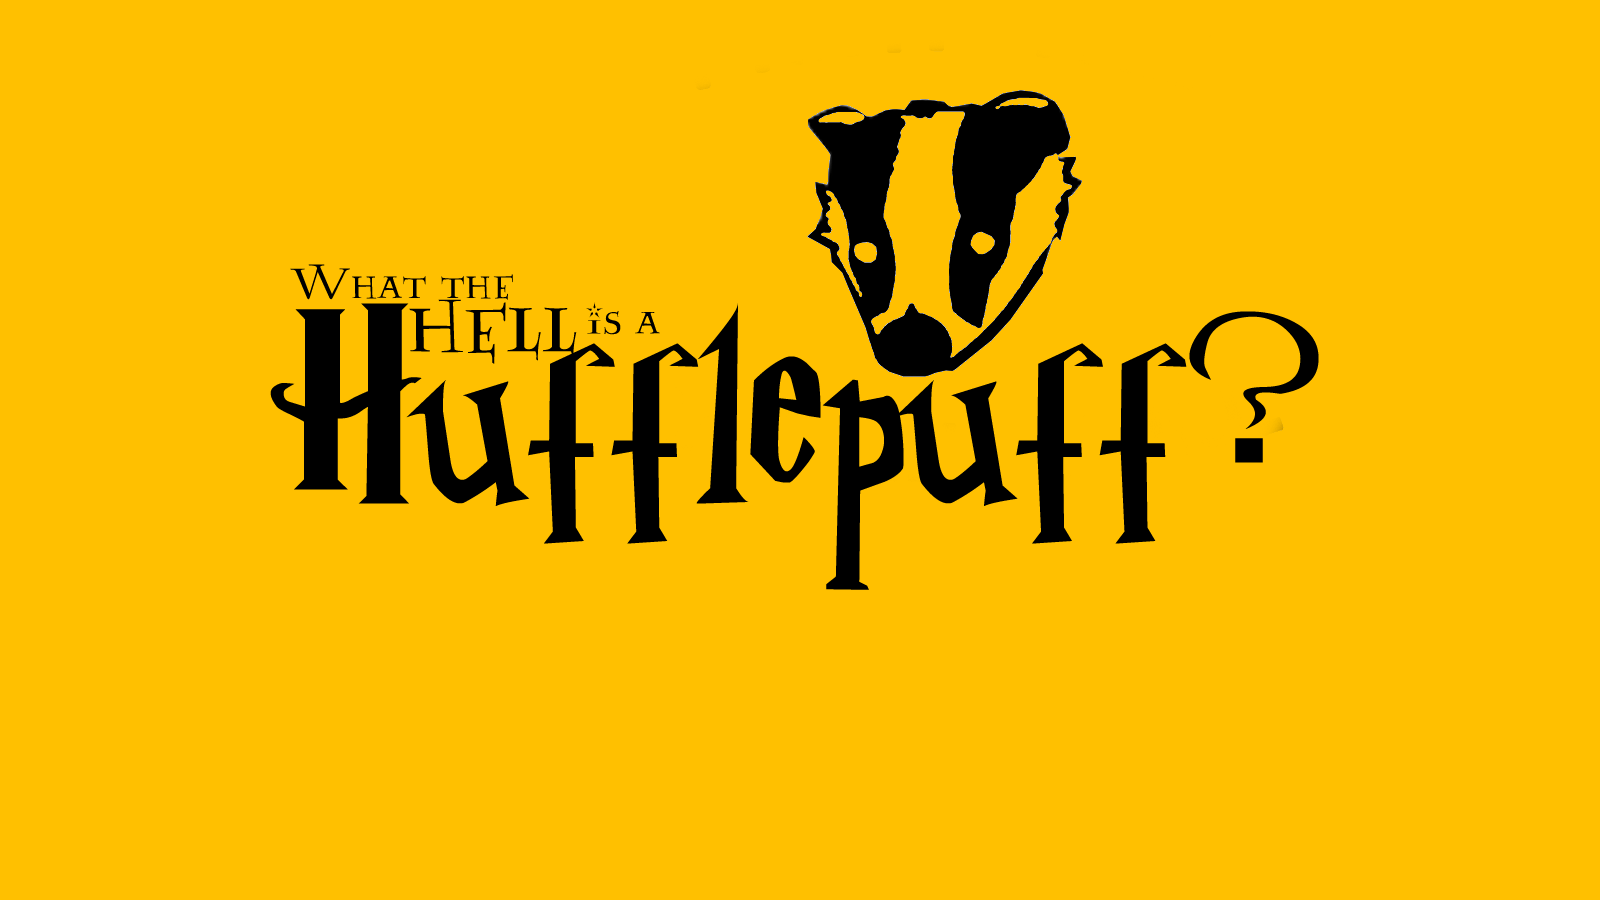 Cute Harry Potter Hufflepuff Computer Wallpapers Wallpapers